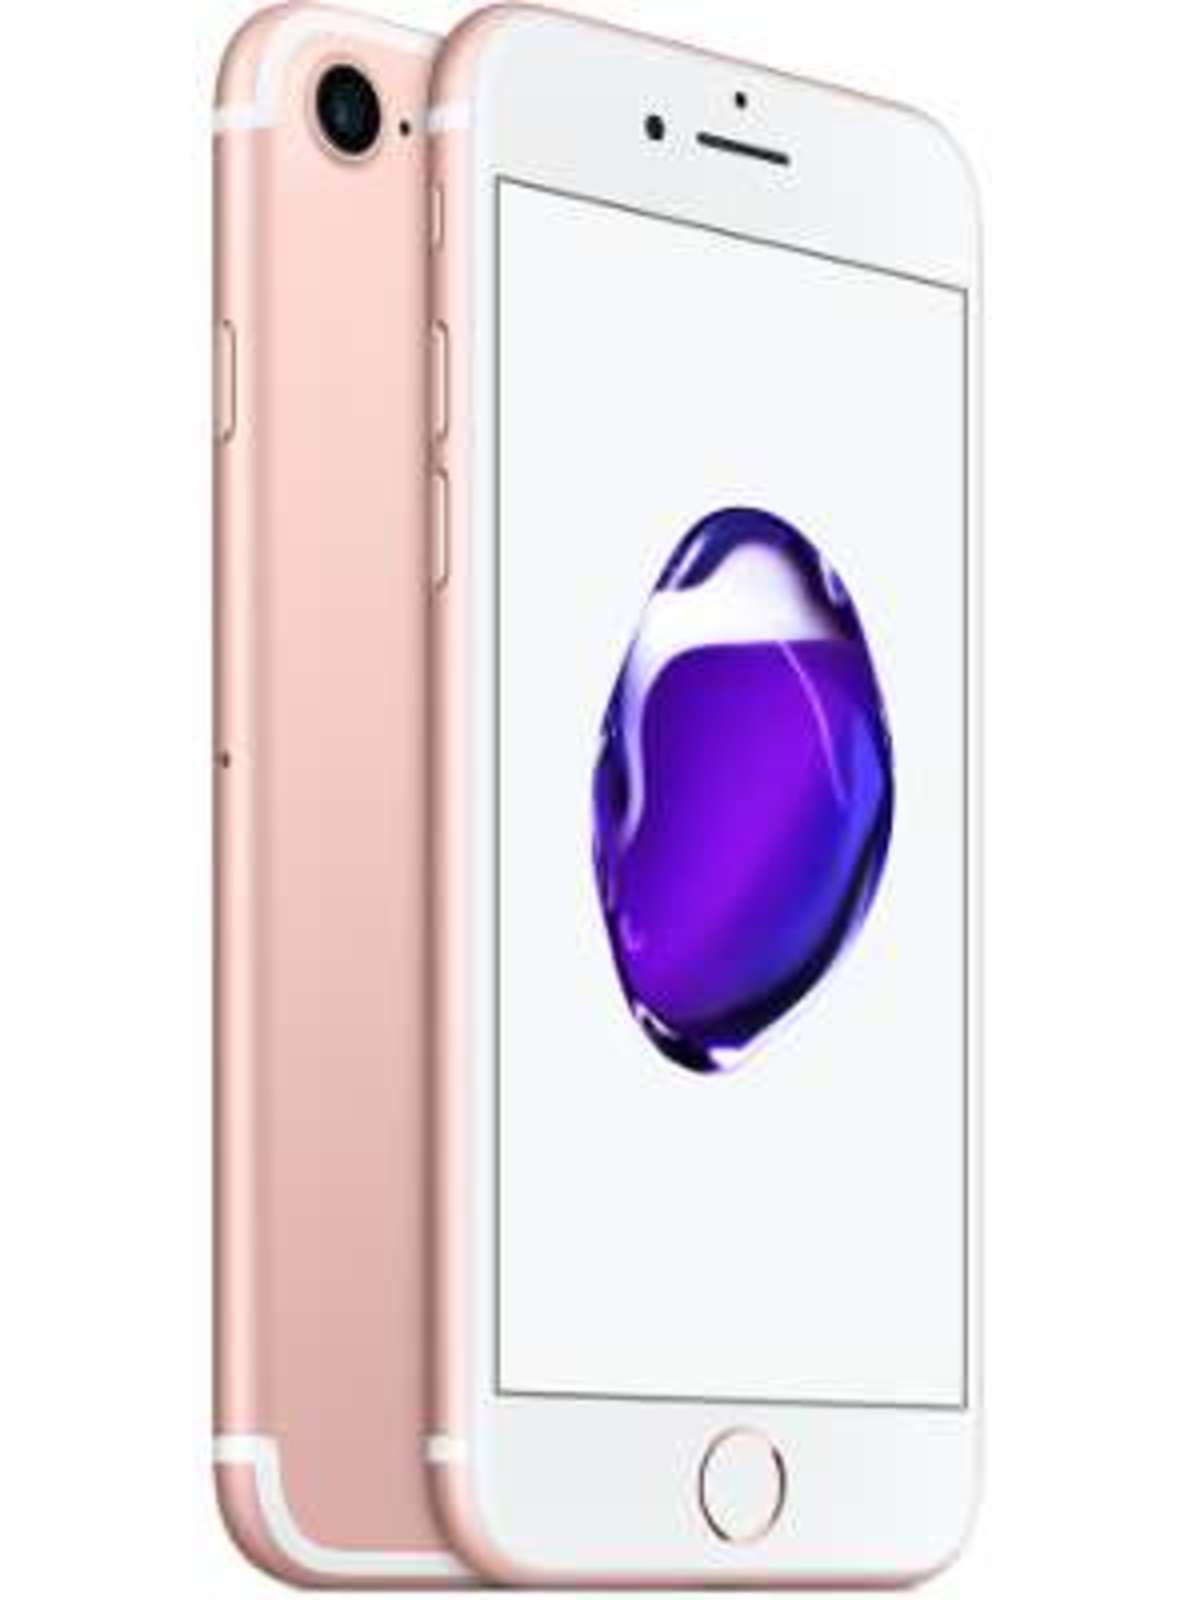 iPhone 7 - Price, Full Specifications  Features at Gadgets Now